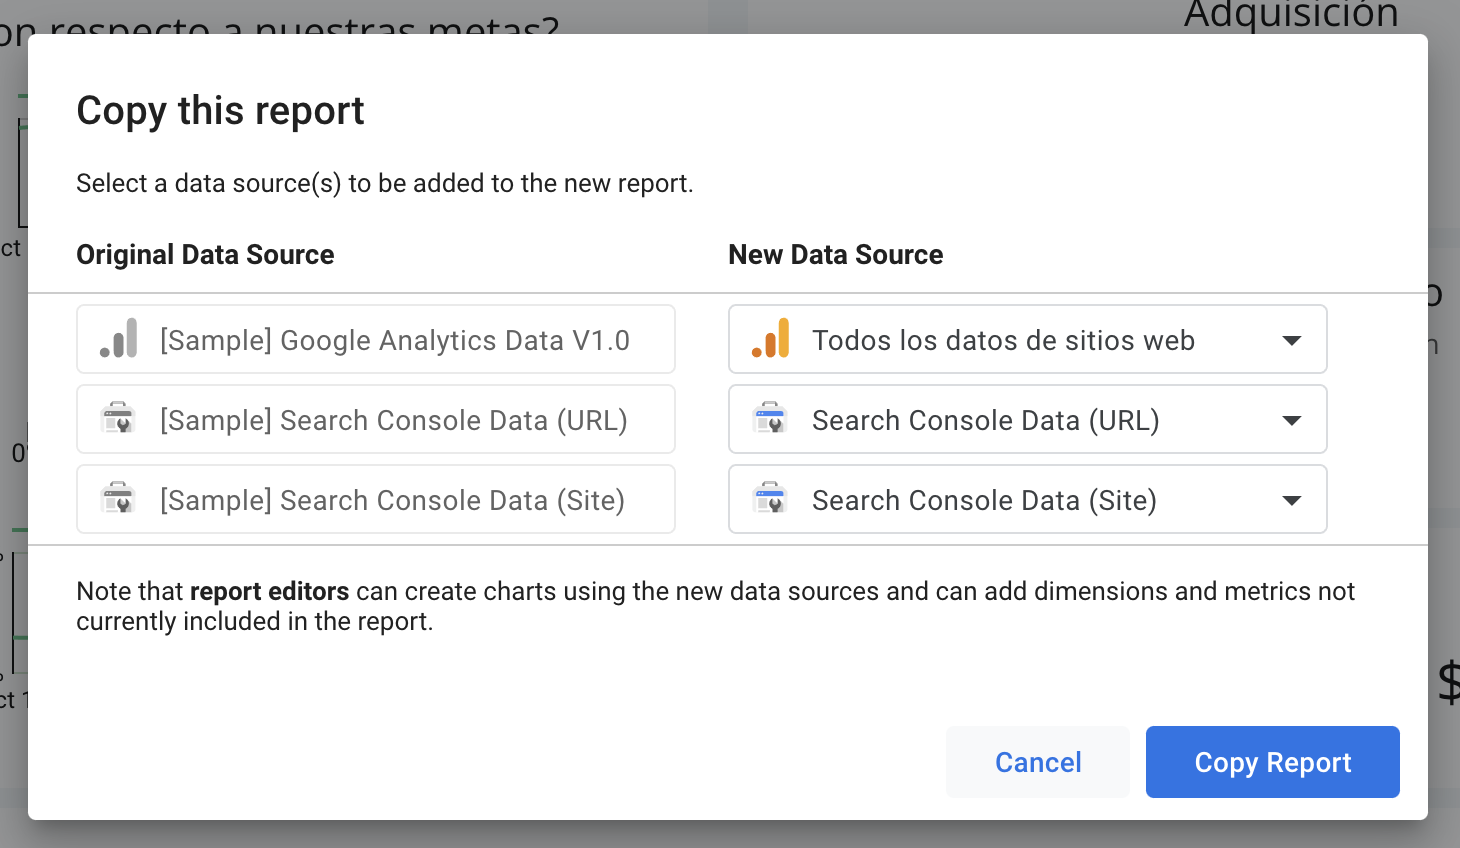 Image showing the Copy Report button.